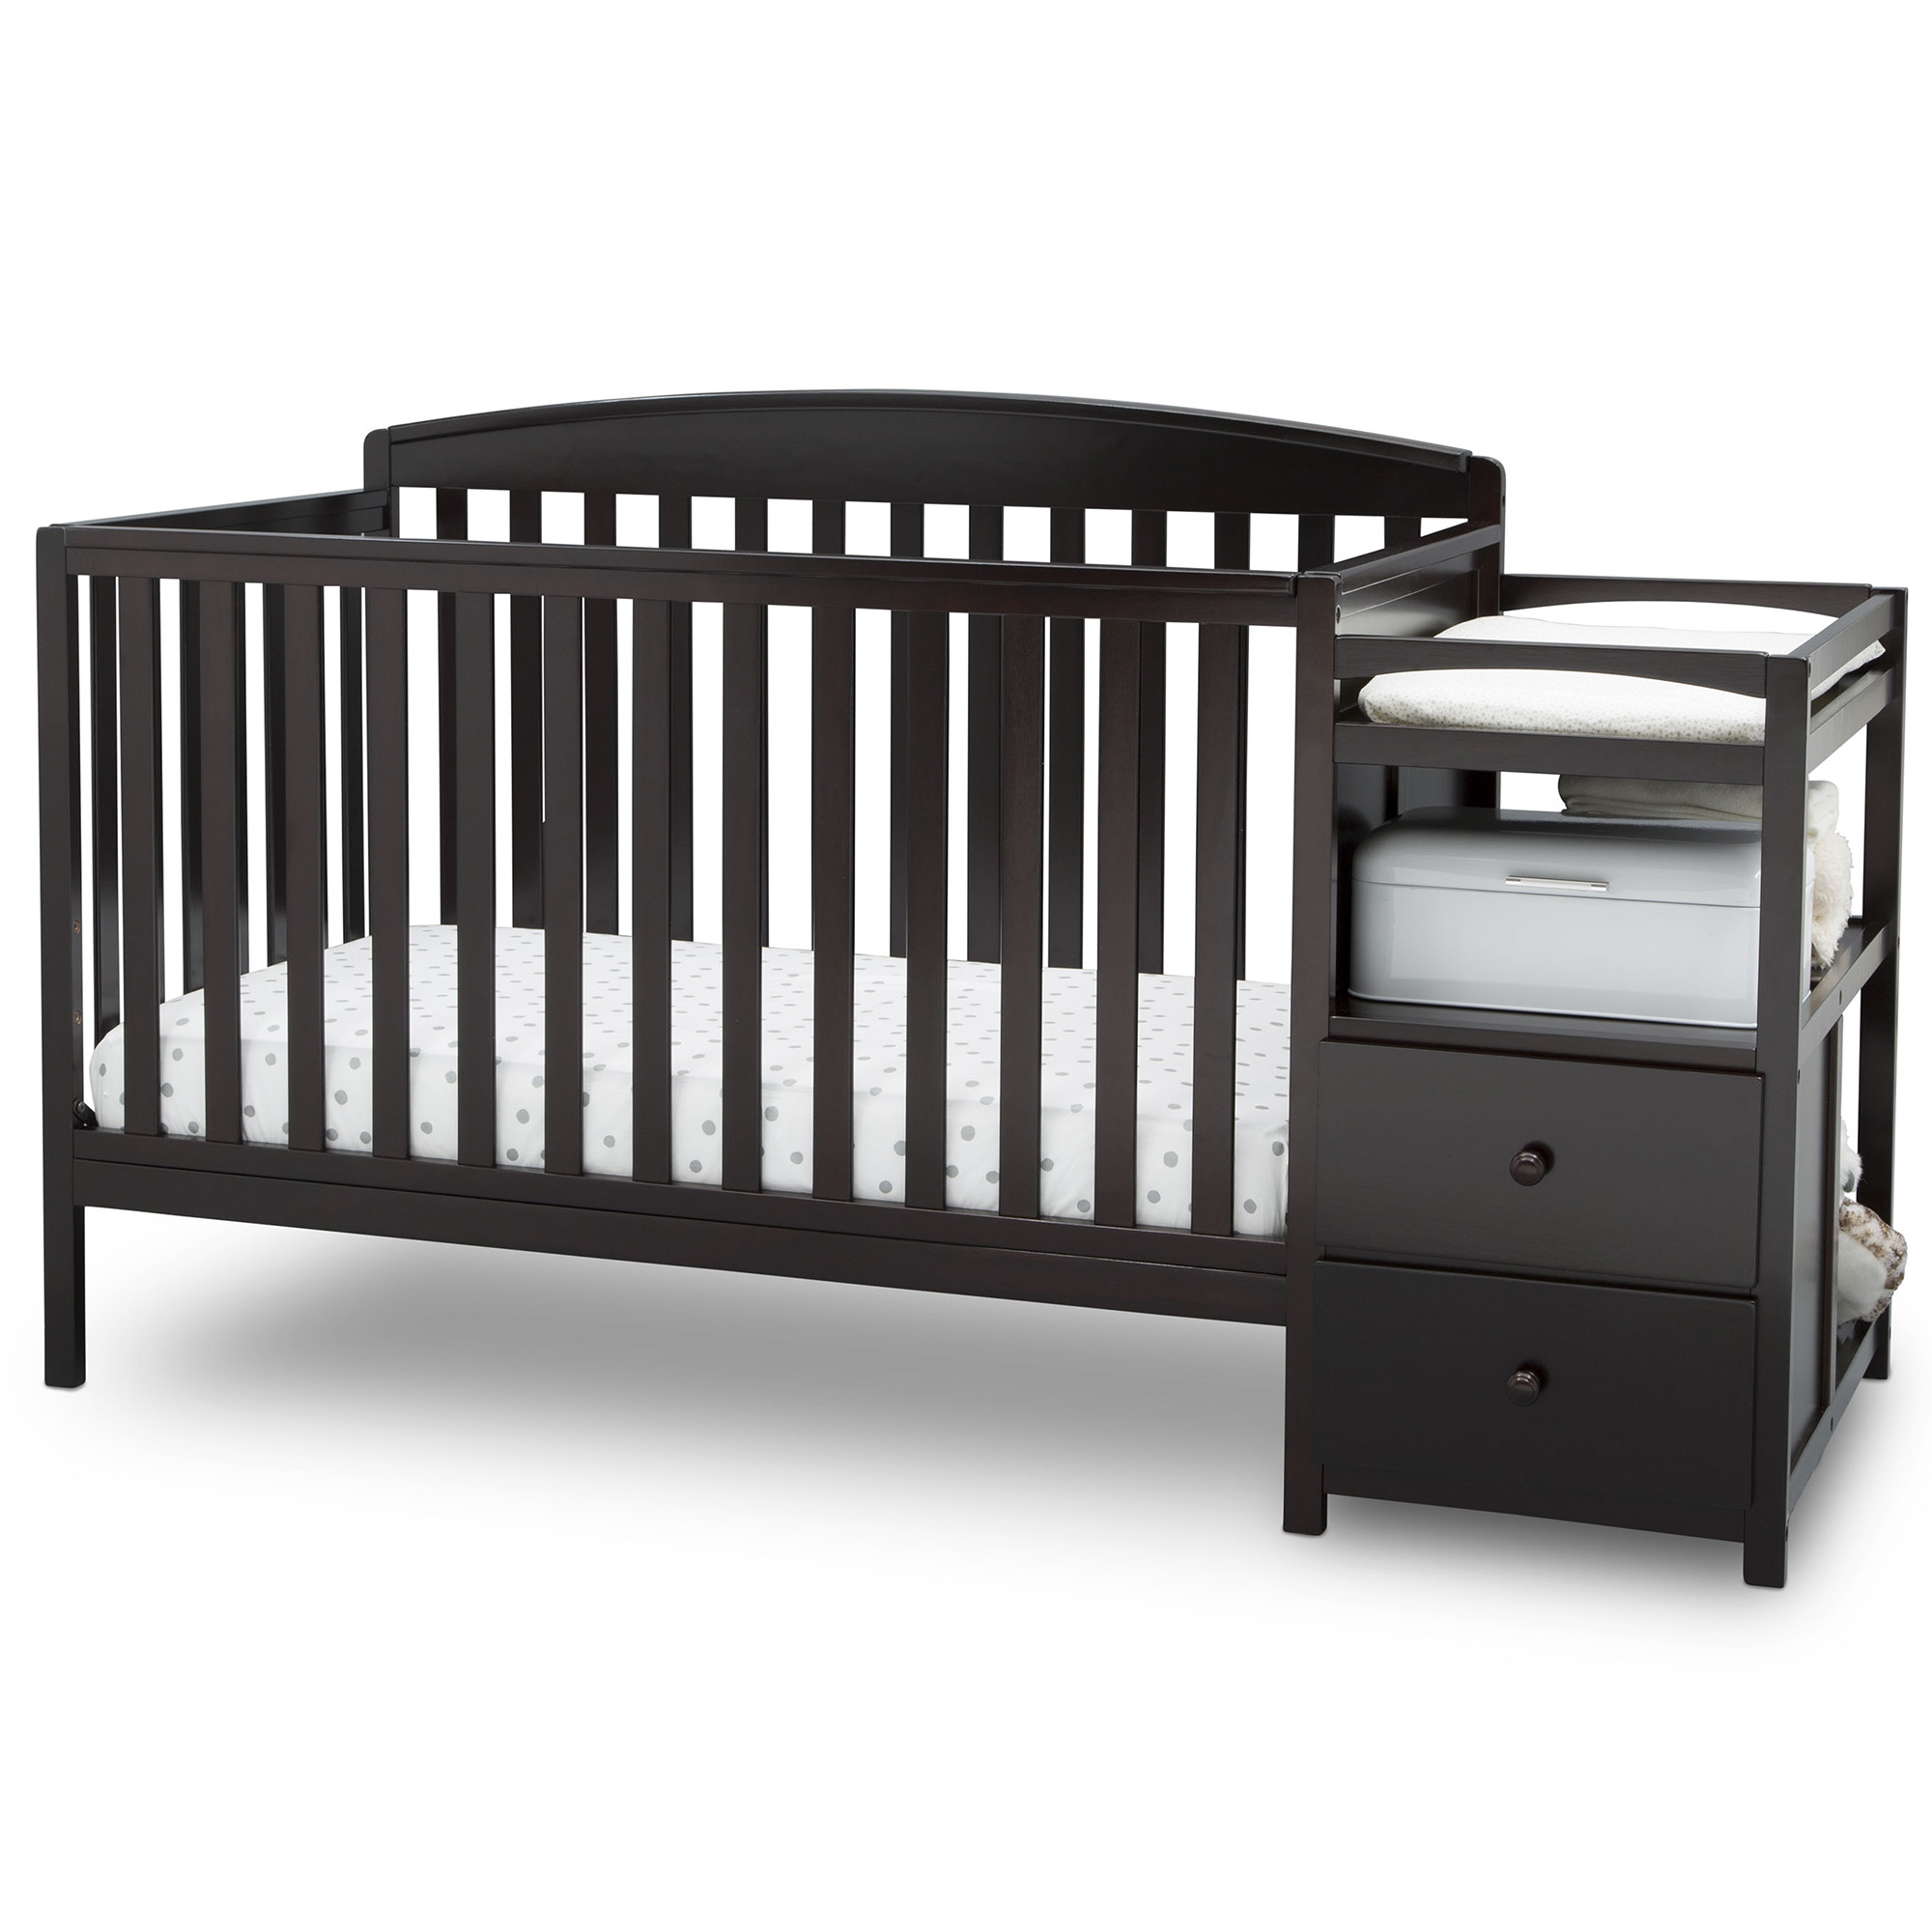 Delta Children Royal 4-in-1 Convertible Baby Crib and Changer, Dark Chocolate - image 1 of 10